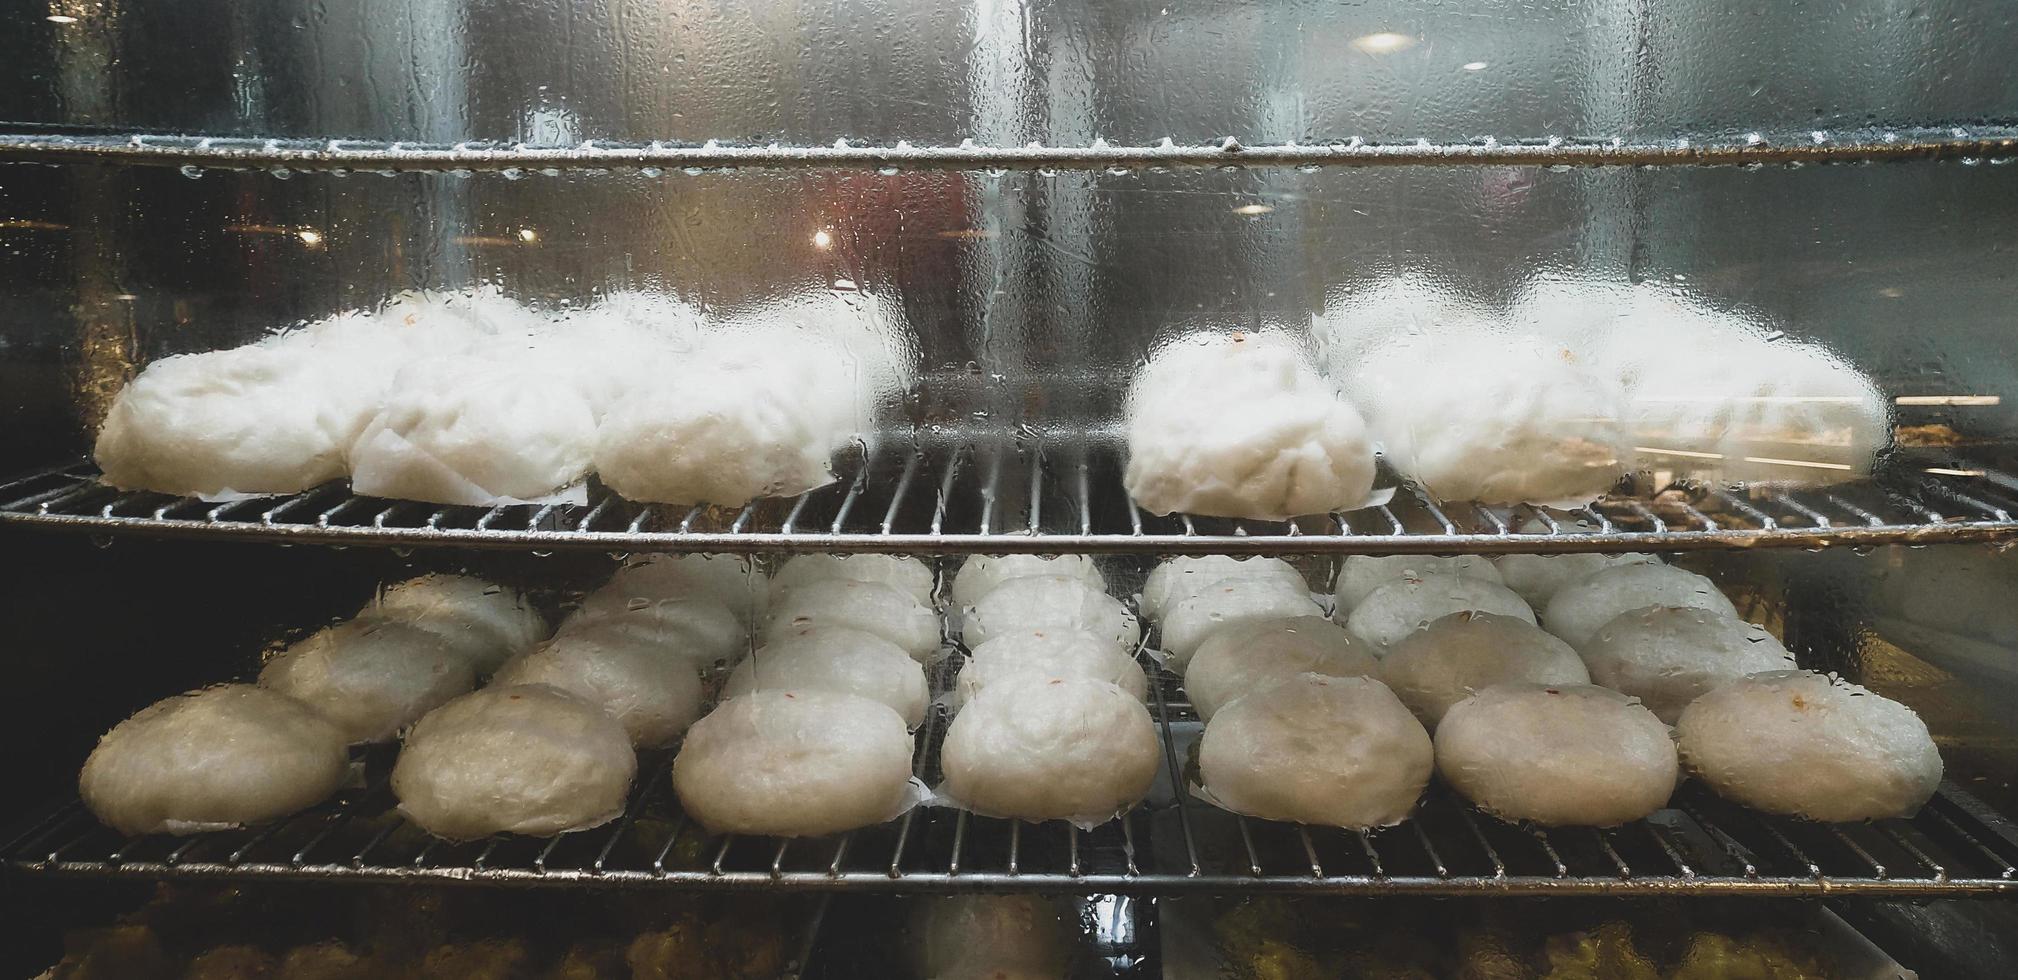 Group of blurred steamed bun in the Incubator photo